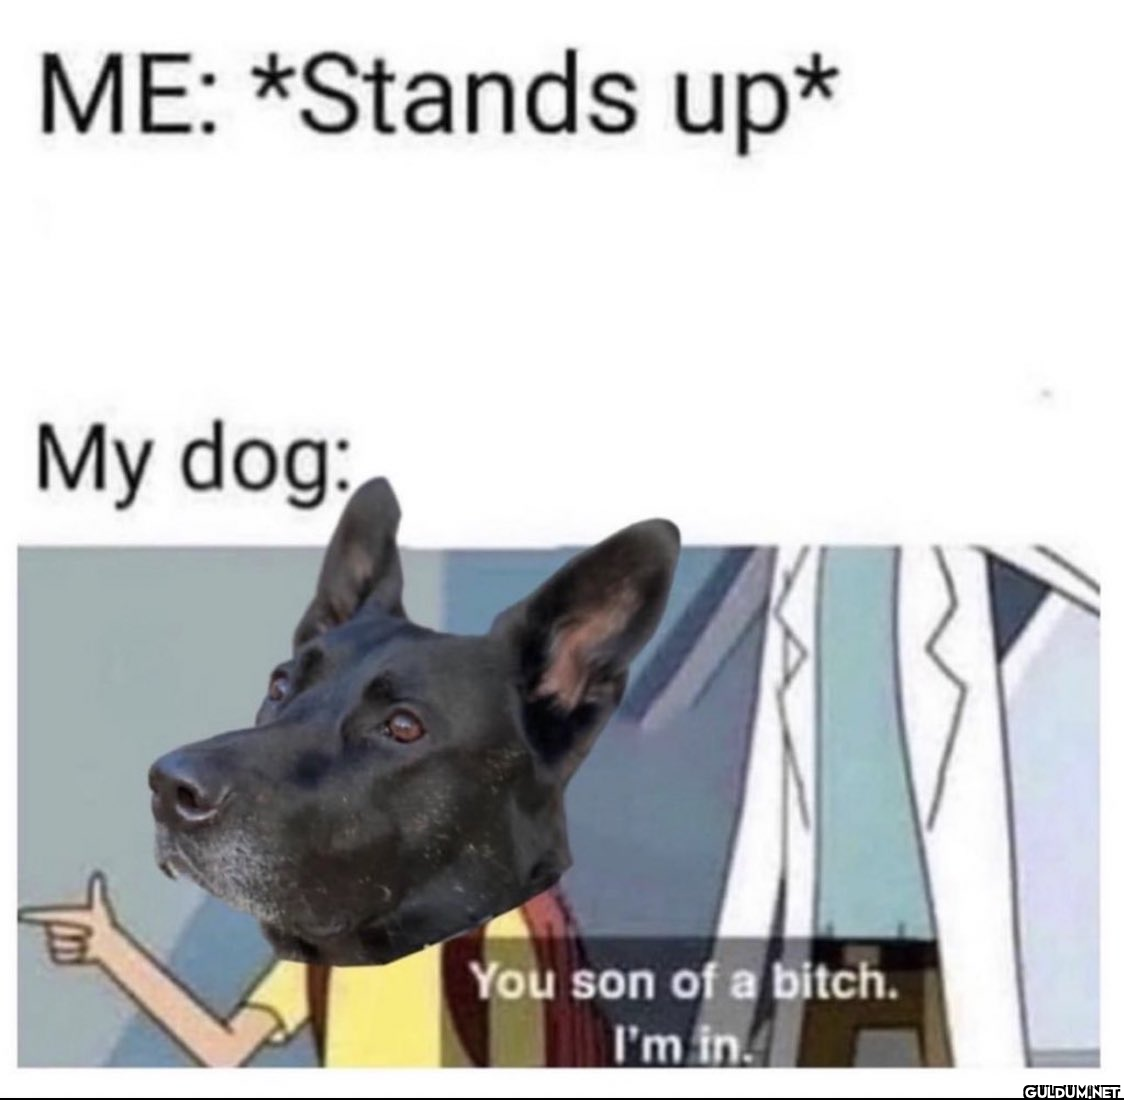 ME: *Stands up* My dog:...